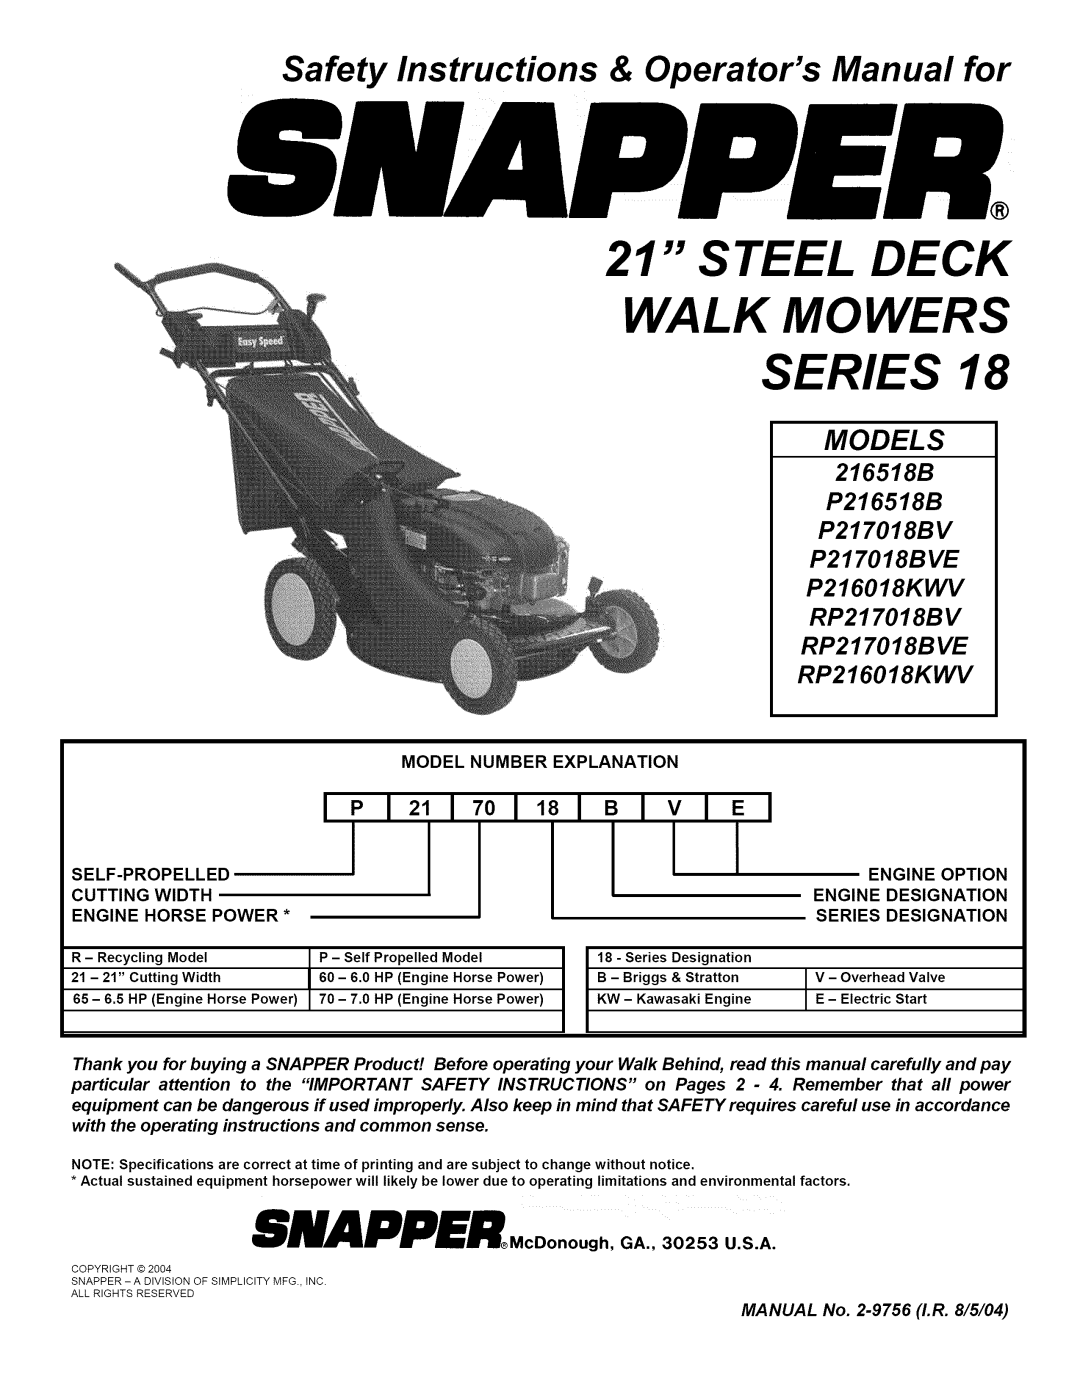 Snapper P216518B important safety instructions Steel Deck Walk Mowers Series, Safety Instructions & Operators Manual for 